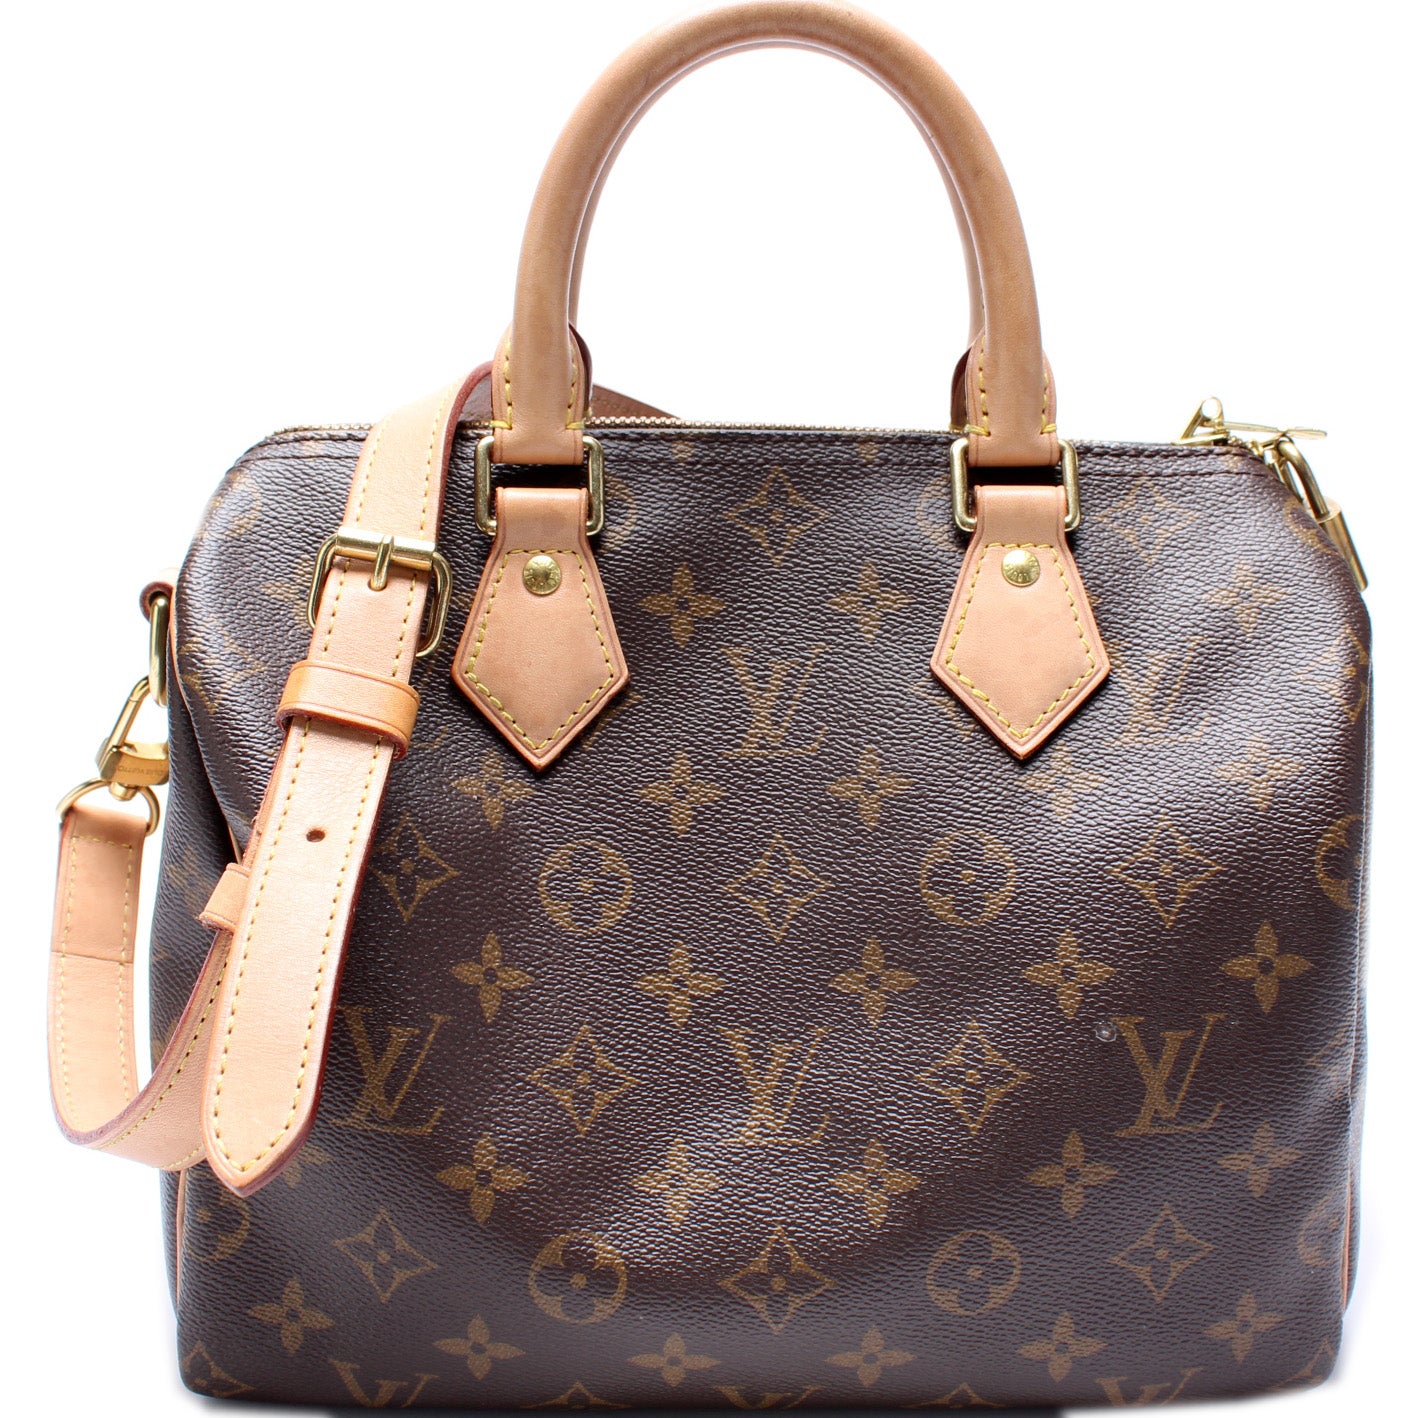 Take this! Louis Vuitton speedy bandouliere 25cm, easy, simple but  timeless! Monogram canvas